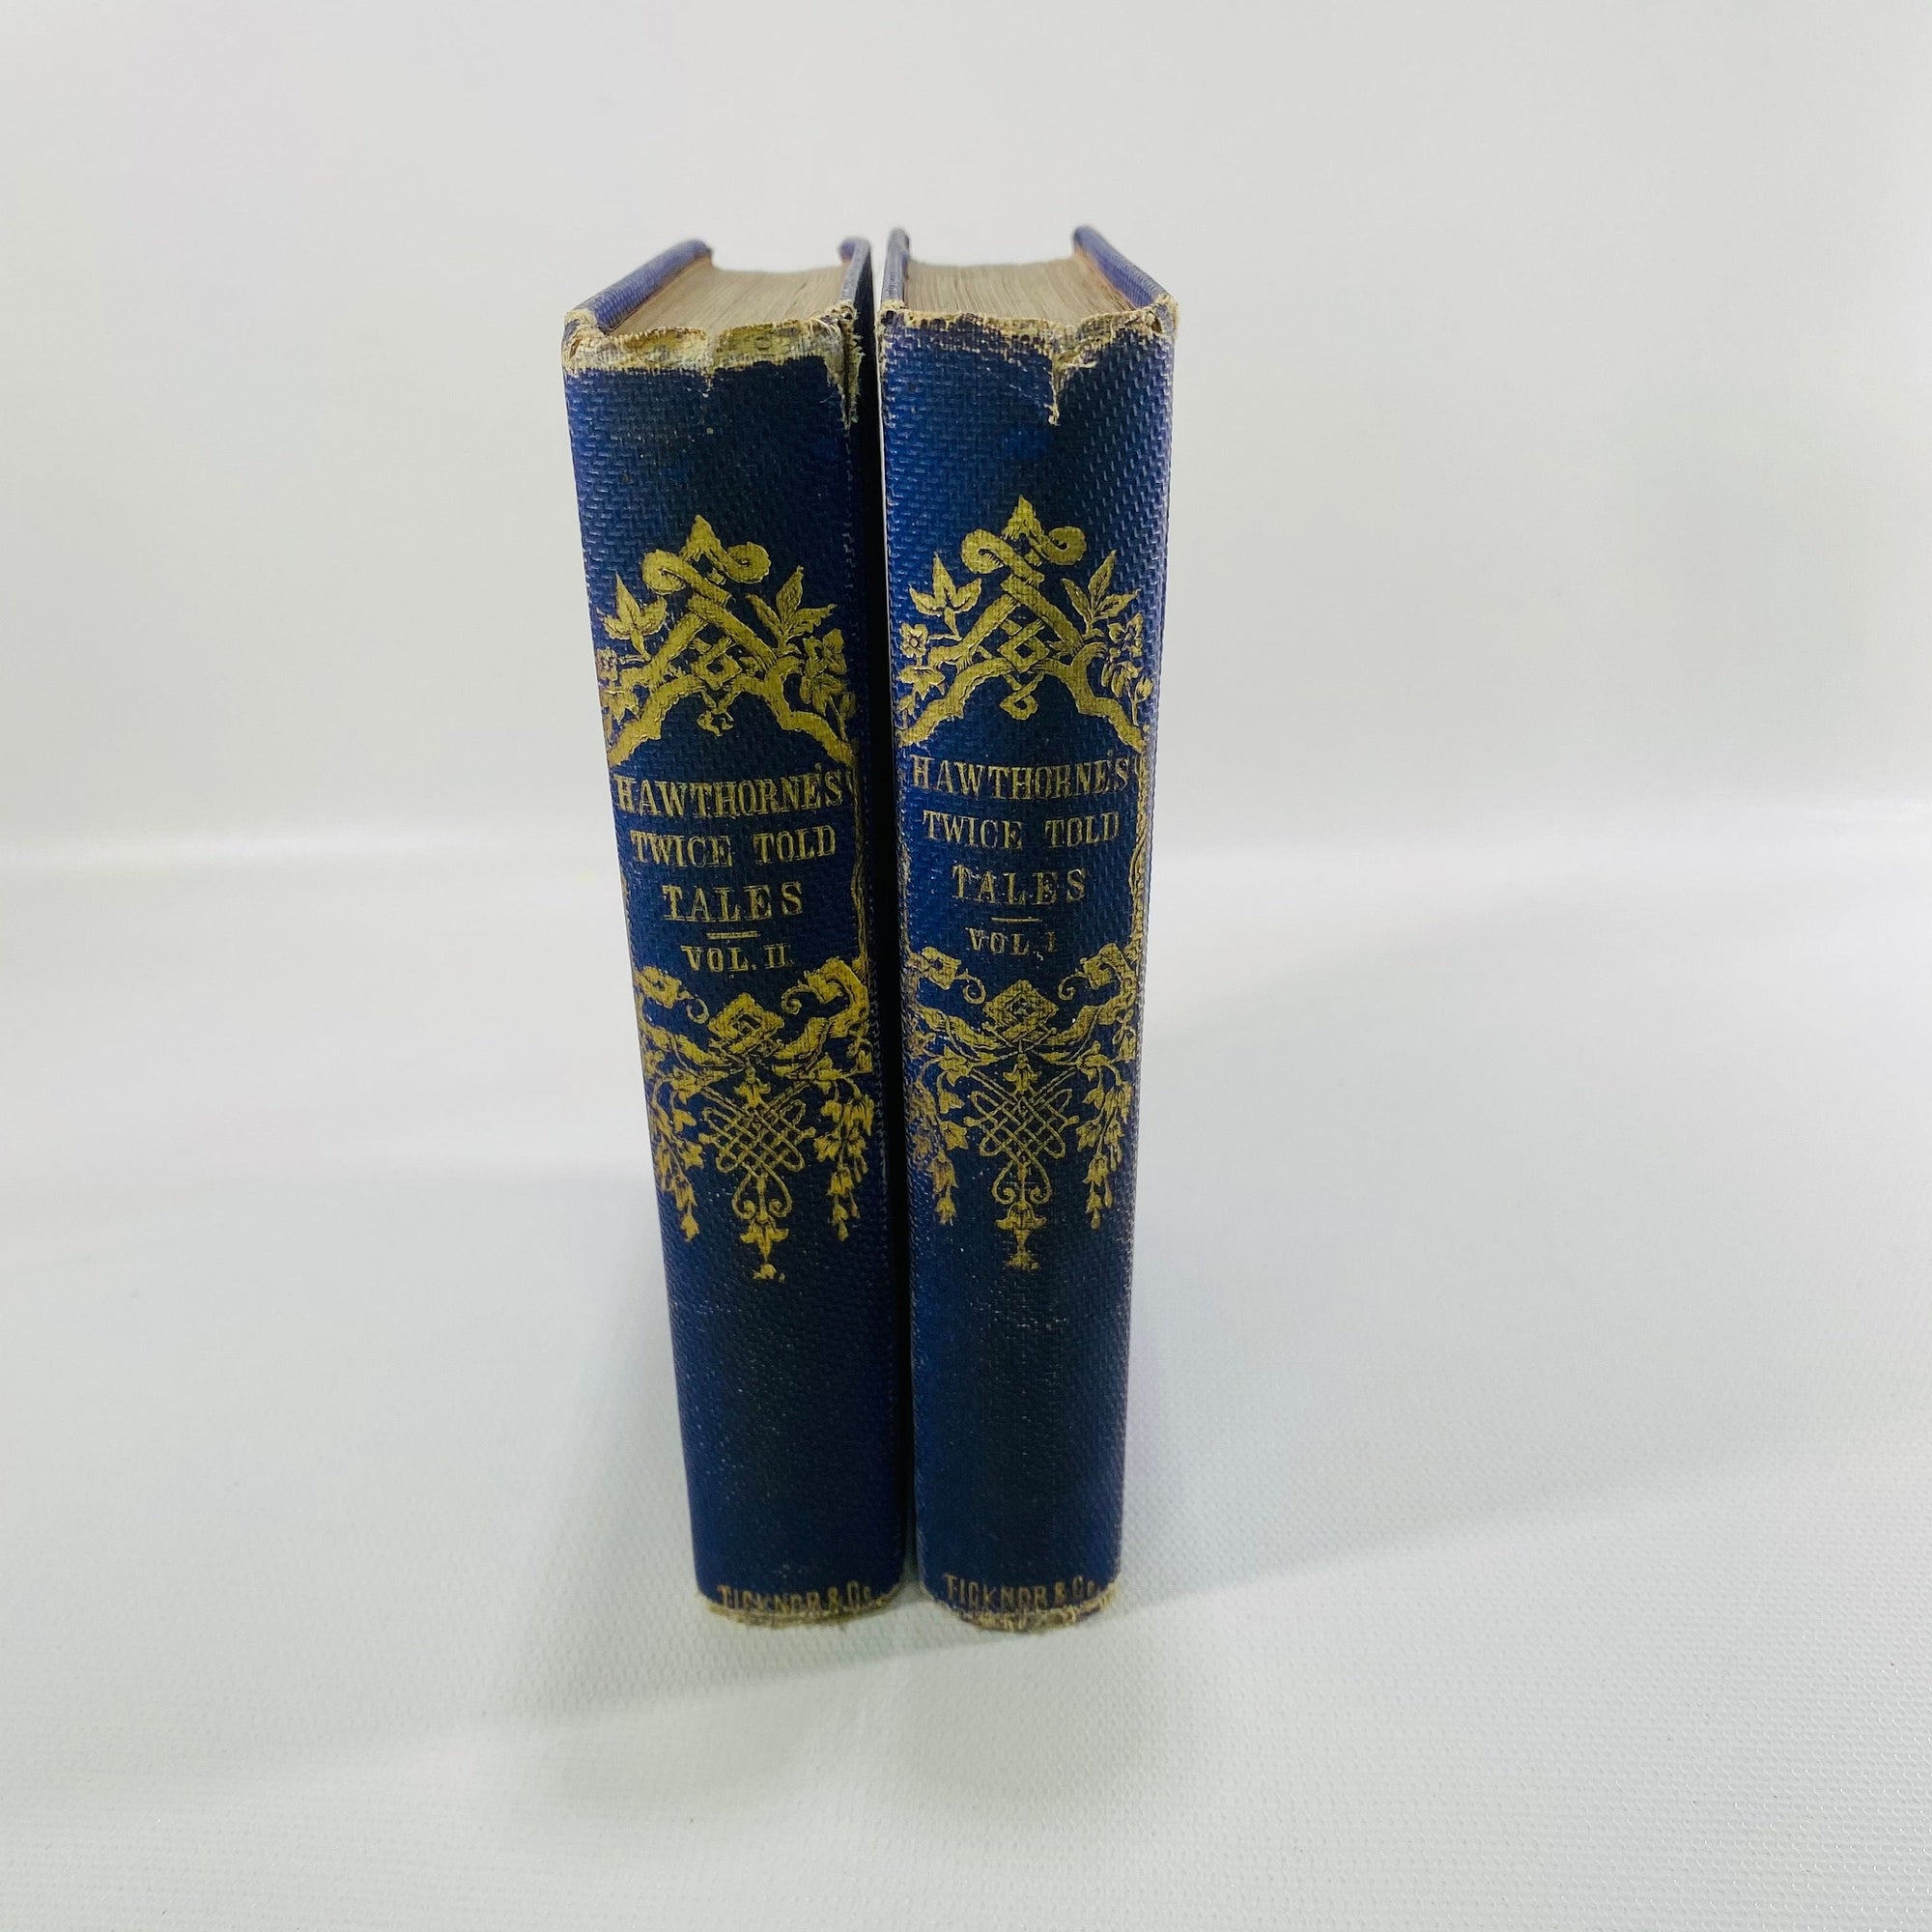 Hawthorn's Twice-Told Tales Volume One & Two by Nathaniel Hawthorn 1865 University Press Vintage Book